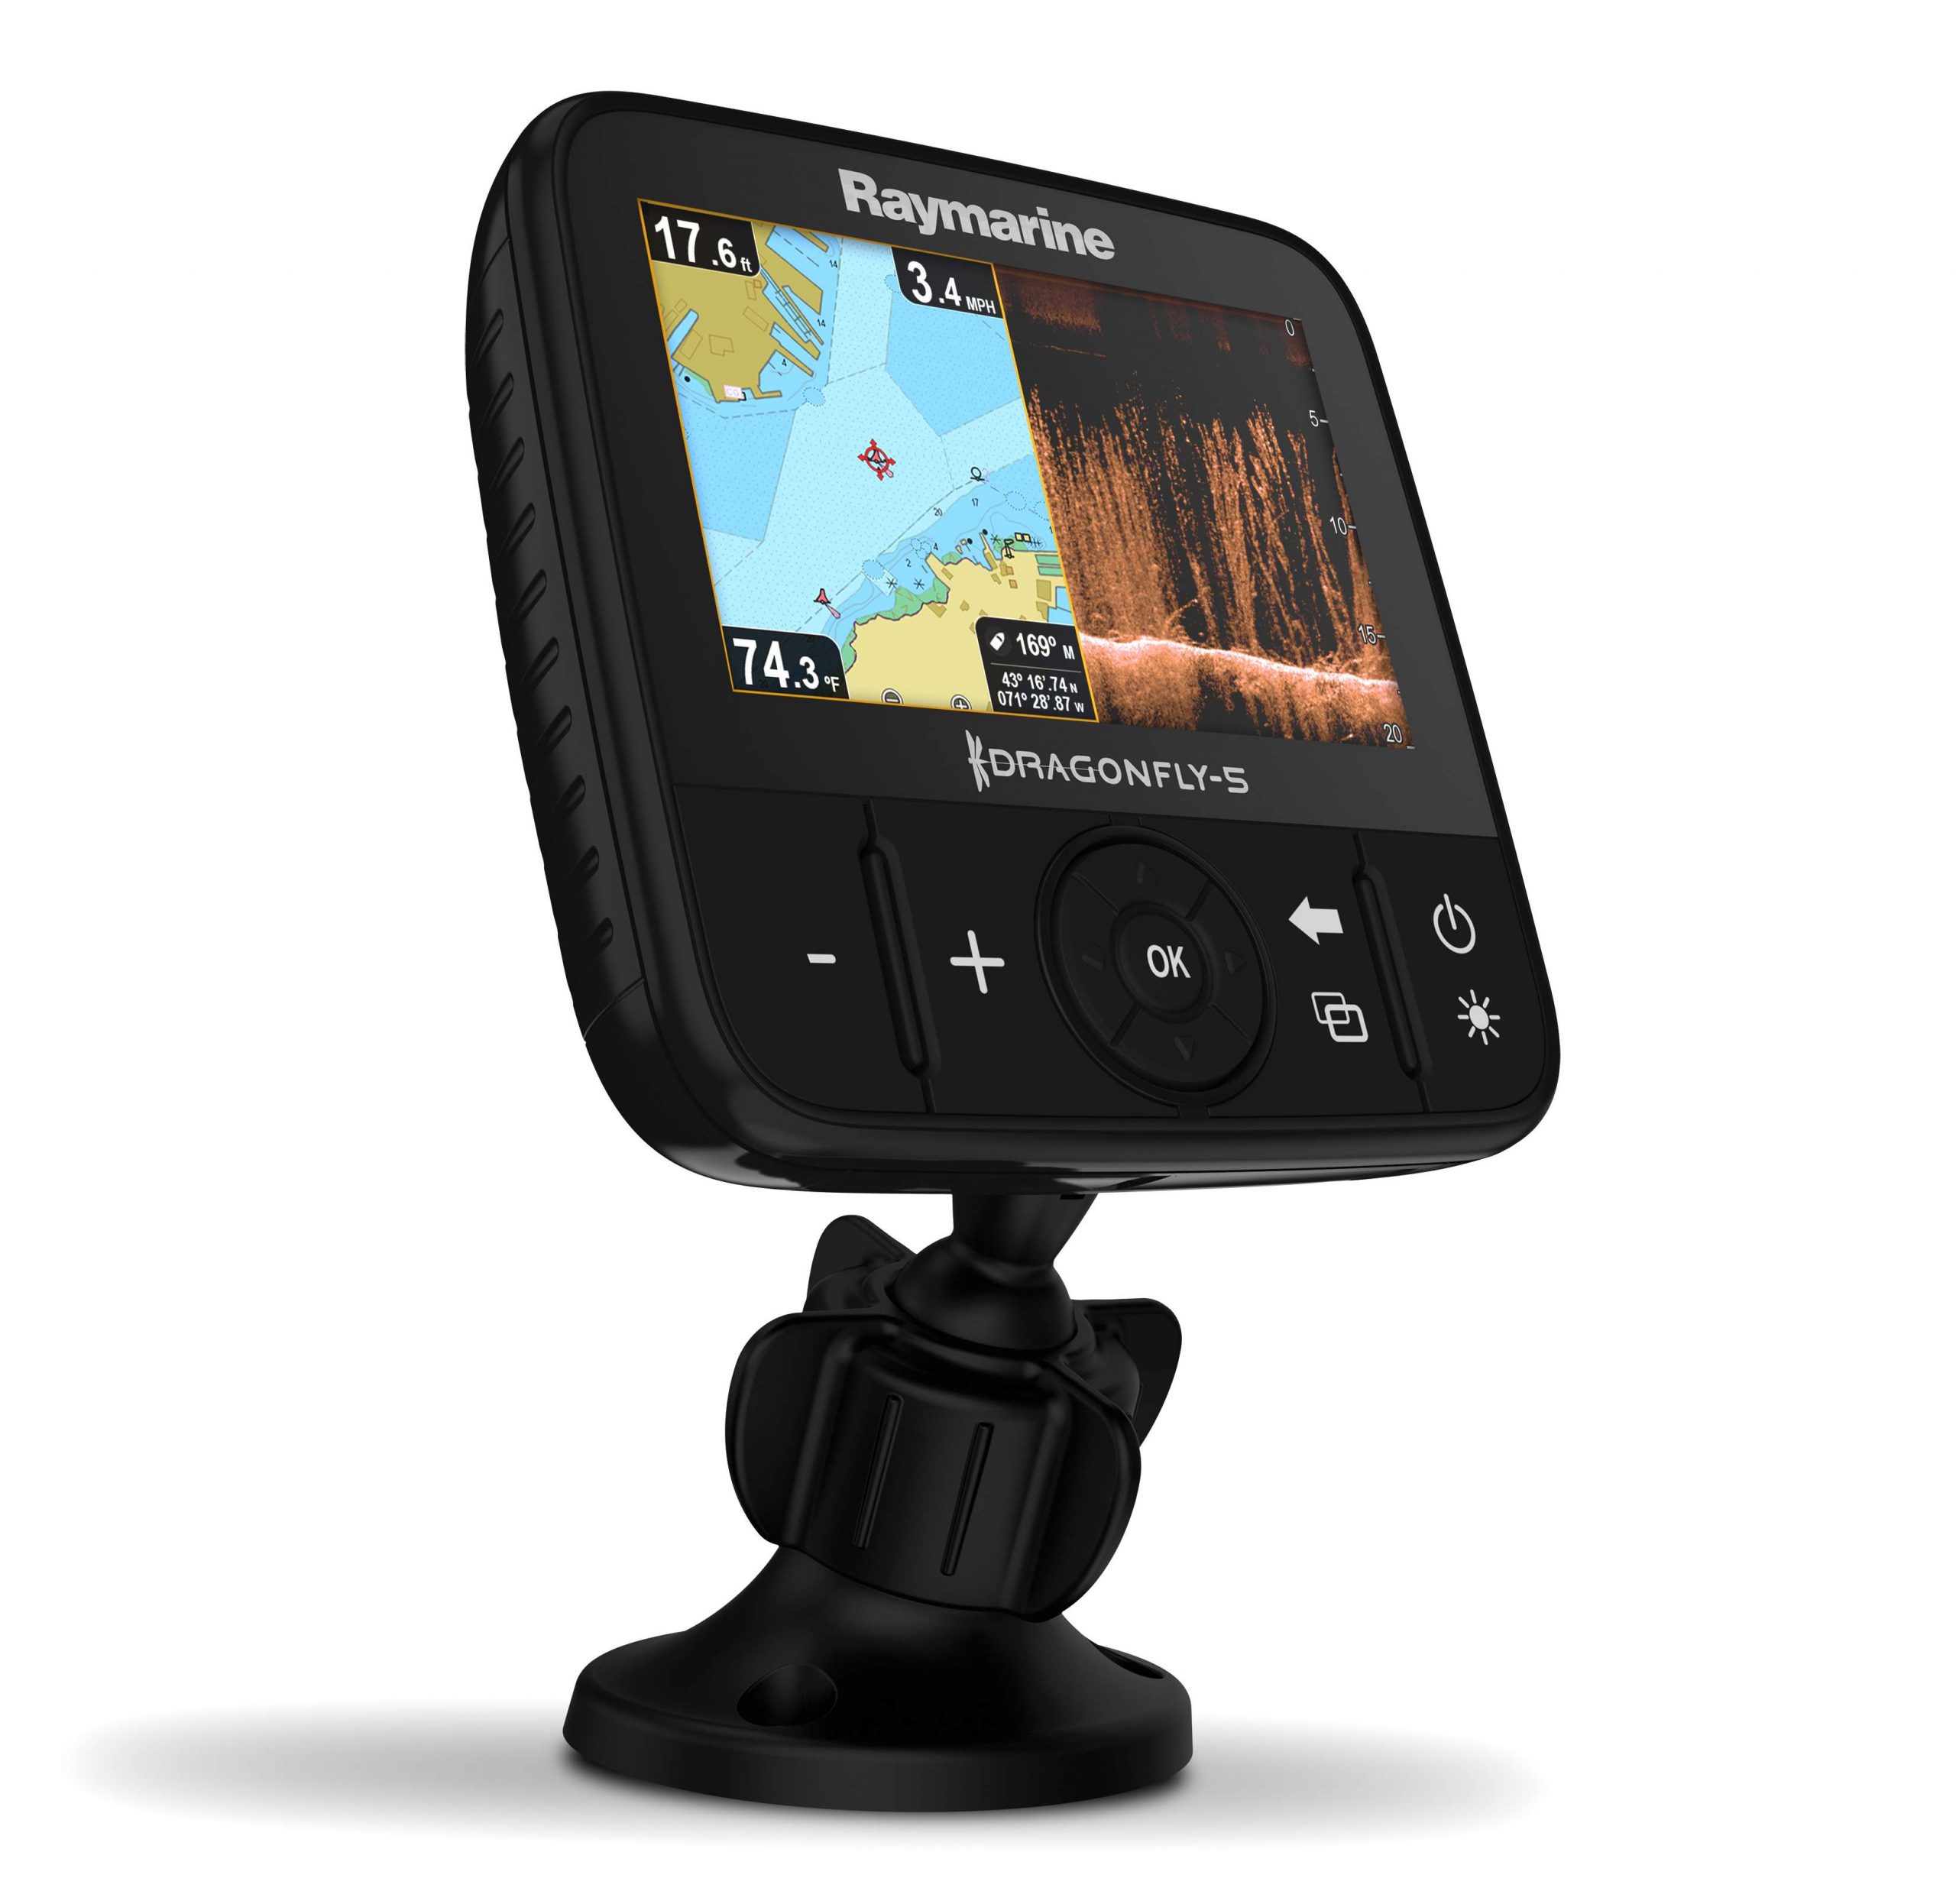 <b>Raymarine</b><br>	Dragonfly line<br>			The new Dragonfly line of fishfinders is being updated in a big way. Seven new products, including the very affordable 4DV (starts at $199!). All use CHIRP DownVision sonar technology, which pulses a wide spectrum of frequencies to provide detailed images of your next catch. Pictured above is the 5 PRO ($549) which adds another sonar channel, GPS and Wifi for streaming to mobile devices.